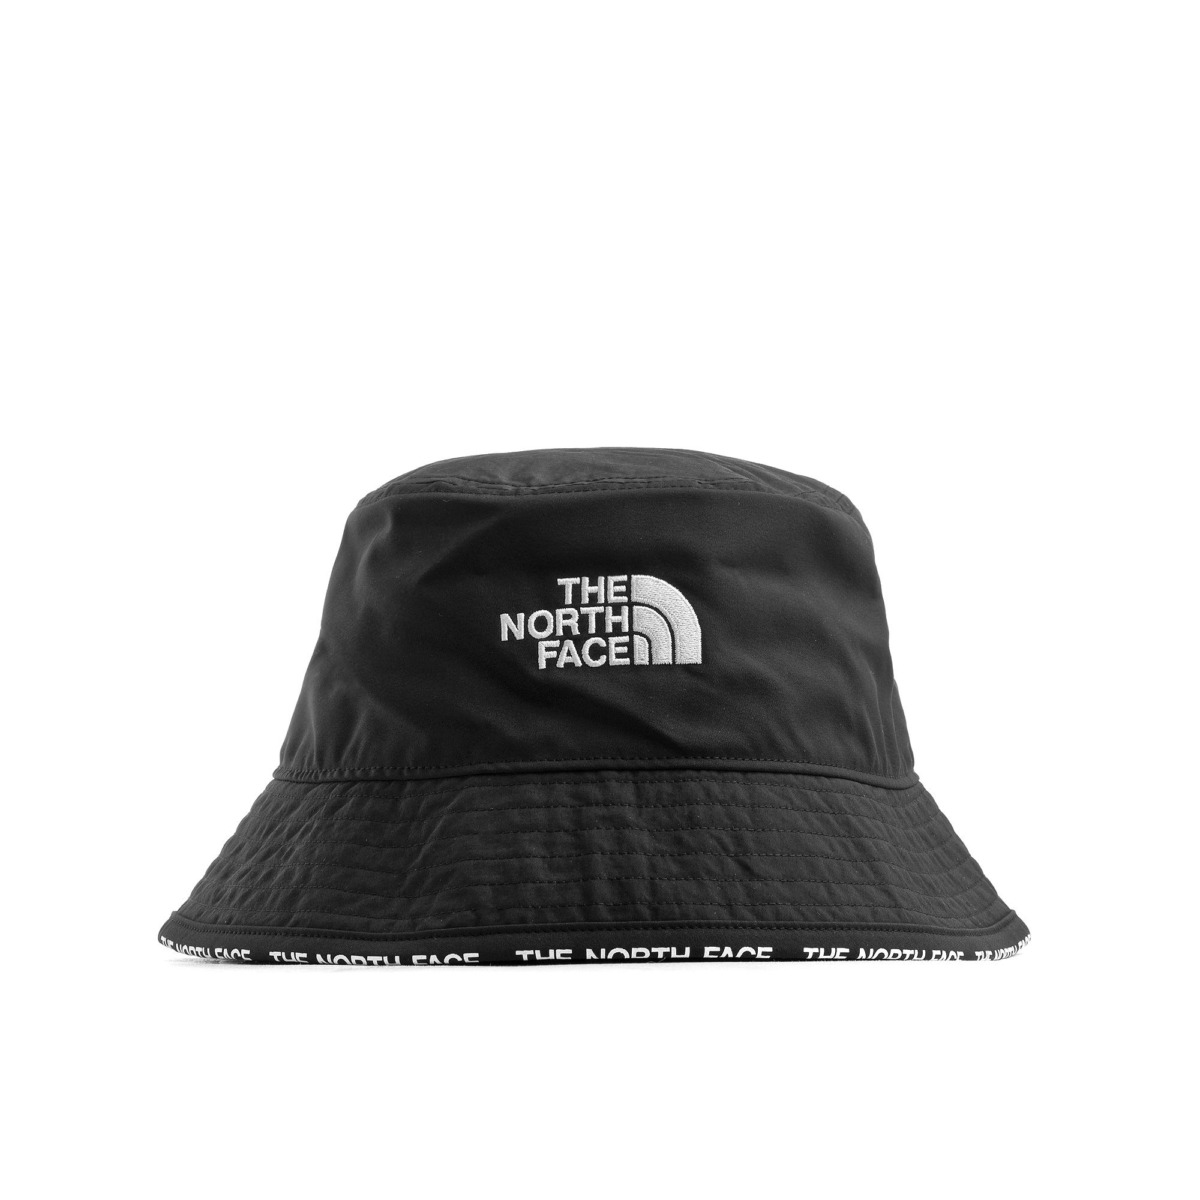 The North Face Cypress Bucket Black Male Hats Now Available At In Bstn Mens HATS GOOFASH